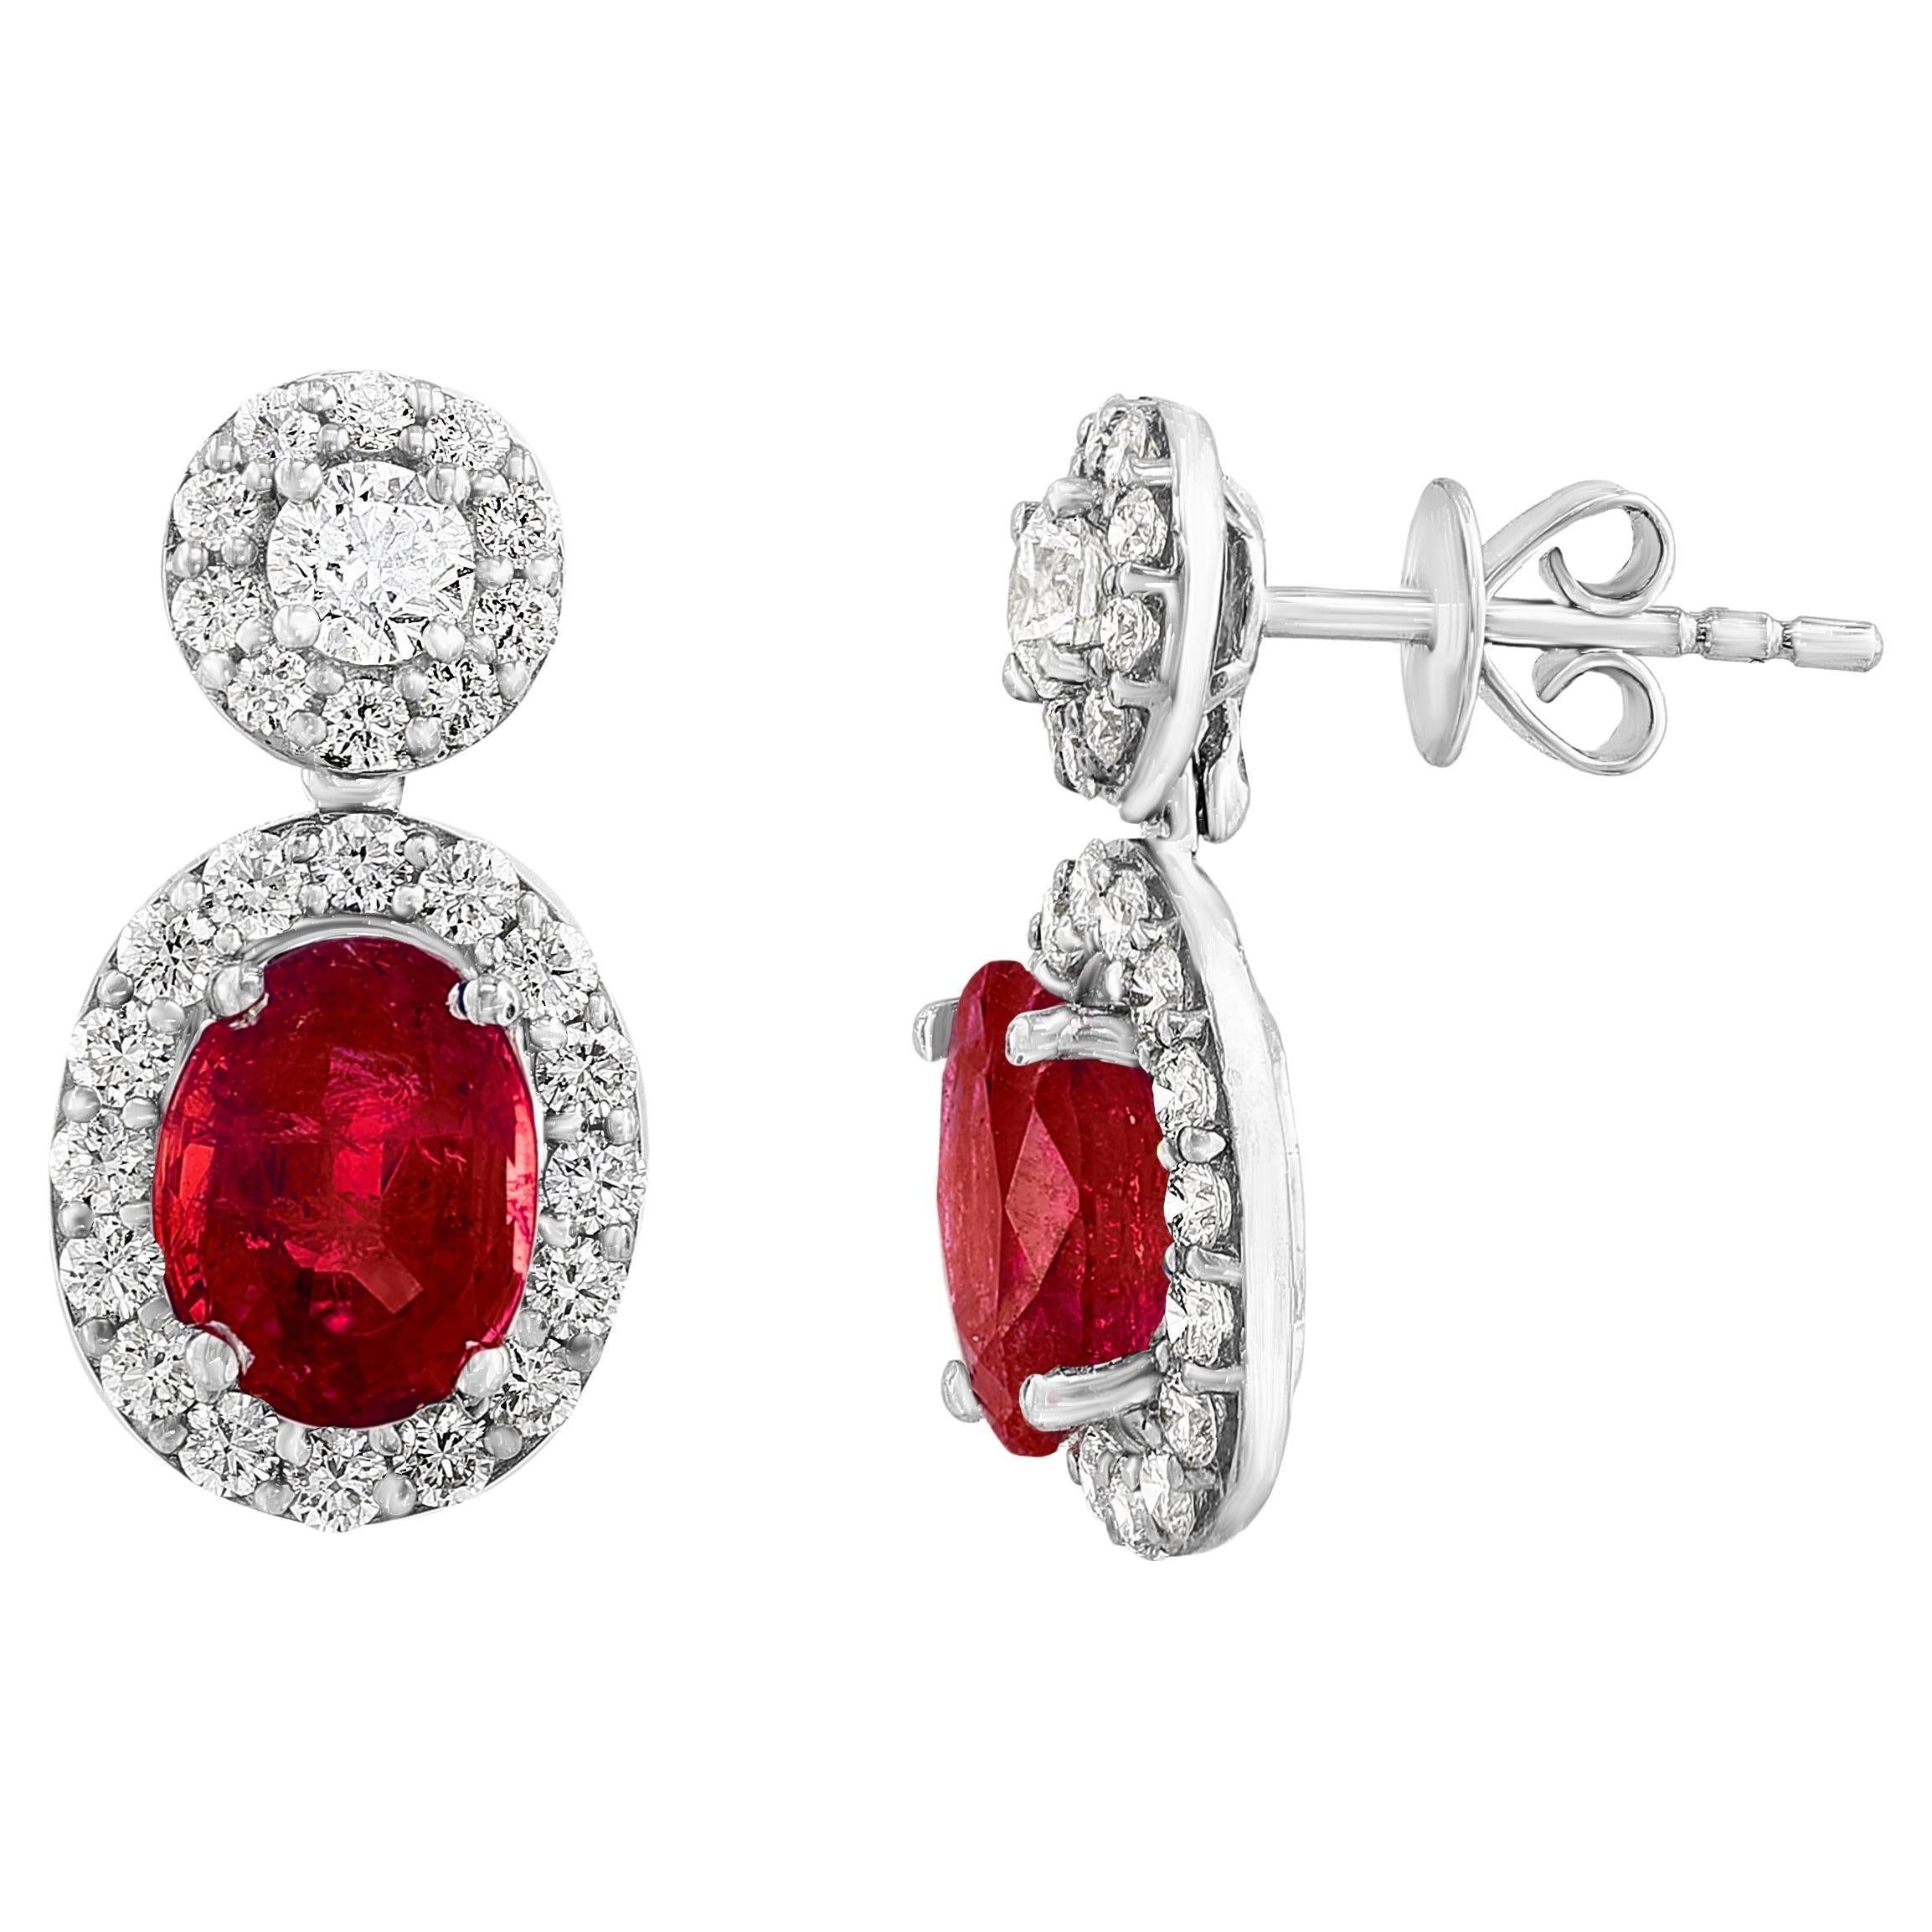 2.32 Carat of Oval cut Rubies and Diamond Drop Earrings in 18K White Gold For Sale